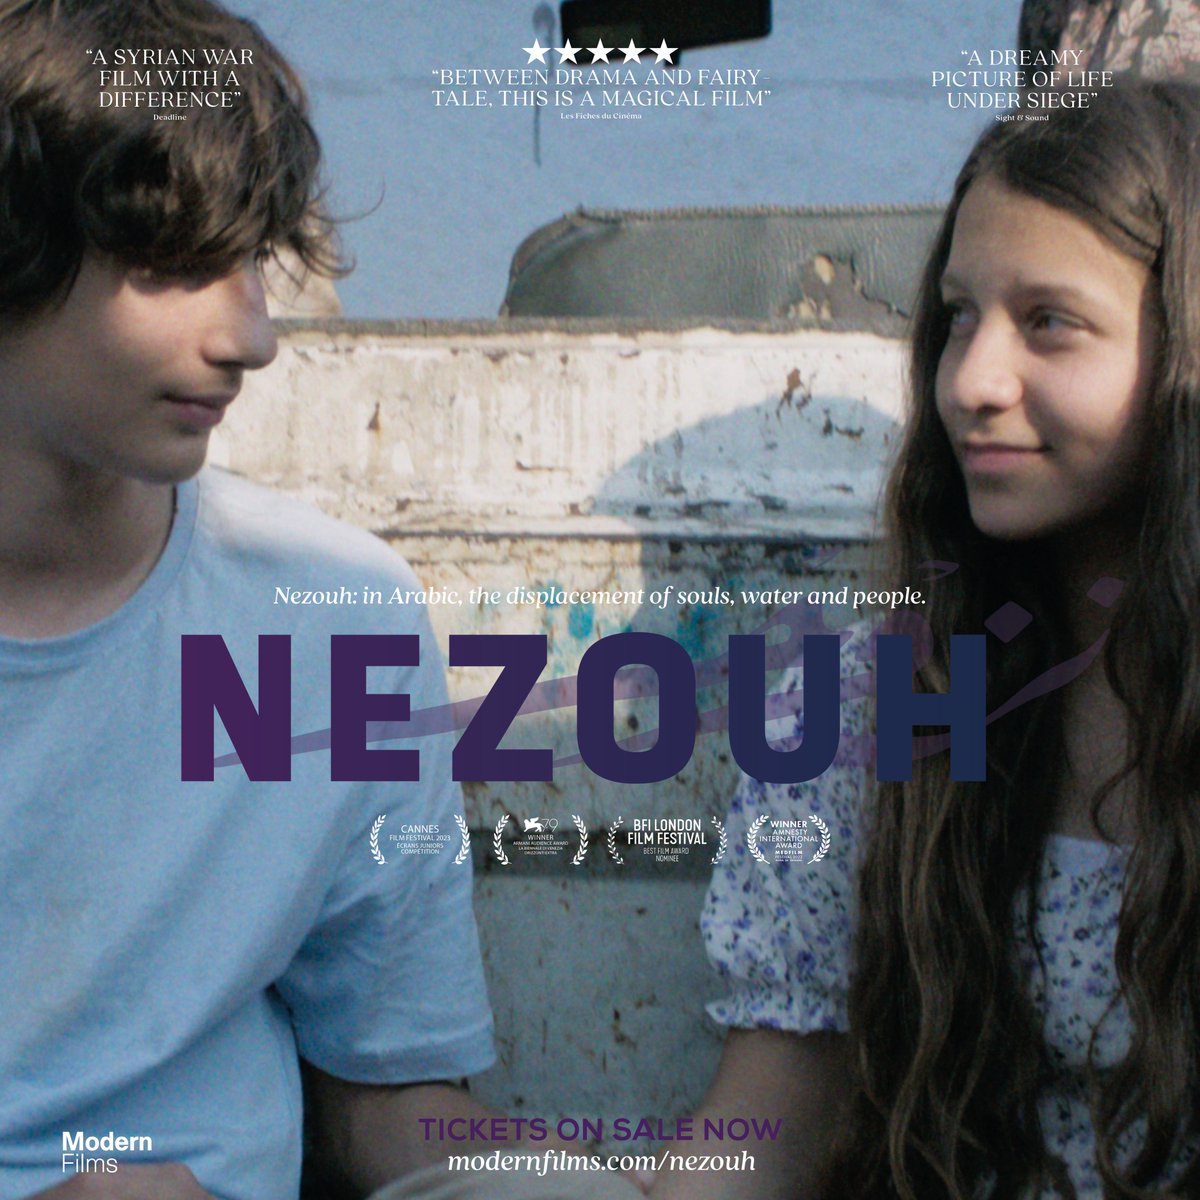 Soudade Kaadan's NEZOUH continues to screen in cinemas across the UK this week and next! Winner of the audience award at Venice Film Festival, and featuring cinematography from Hélène Louvart (La Chimera, The Lost Daughter). Book now: modernfilms.com/nezouh